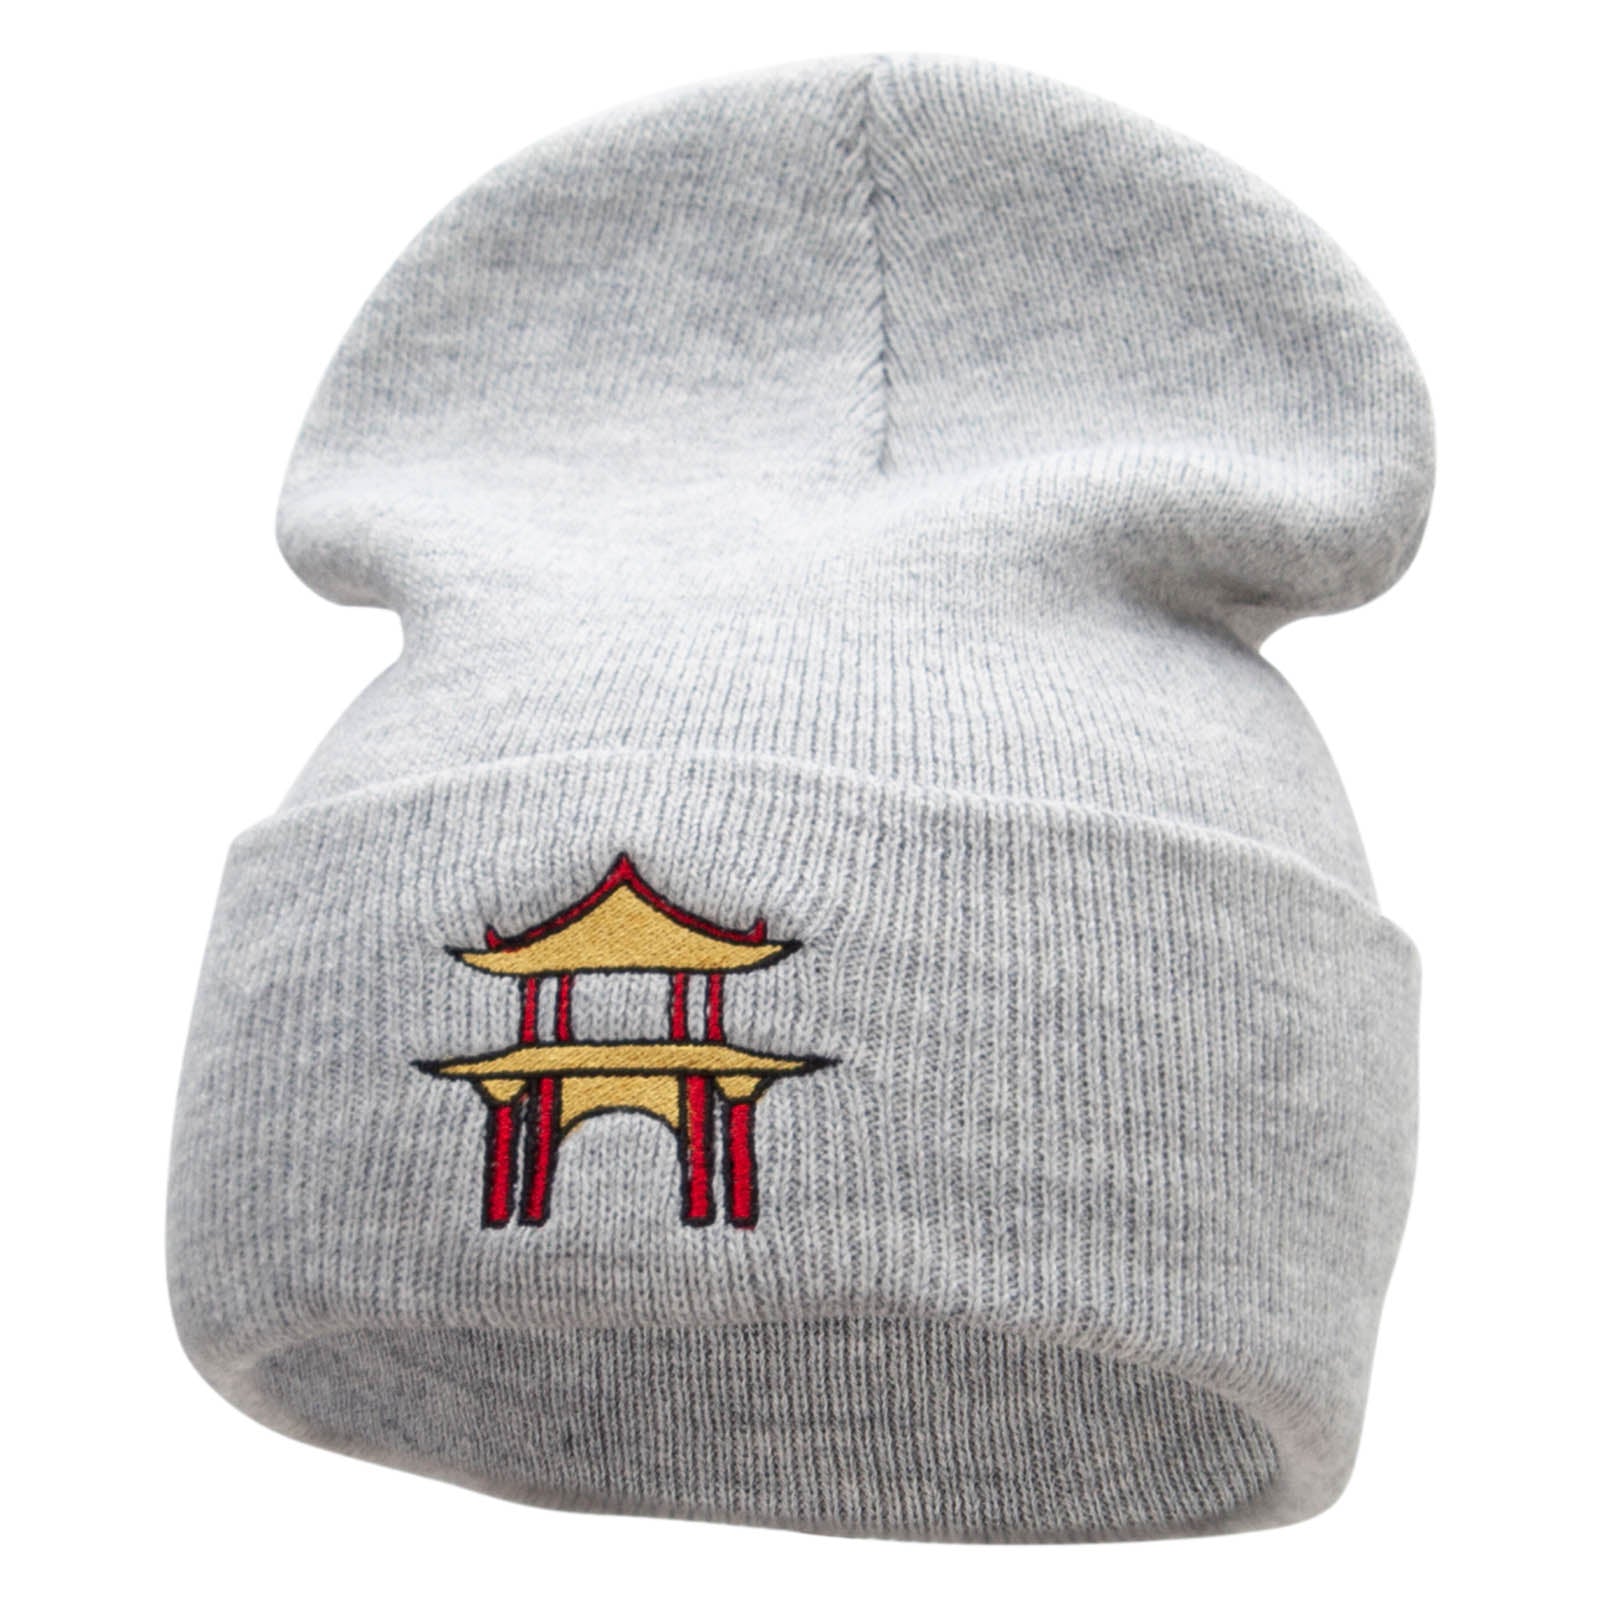 Karate Dojo Embroidered 12 Inch Long Knitted Beanie - Heather Grey OSFM